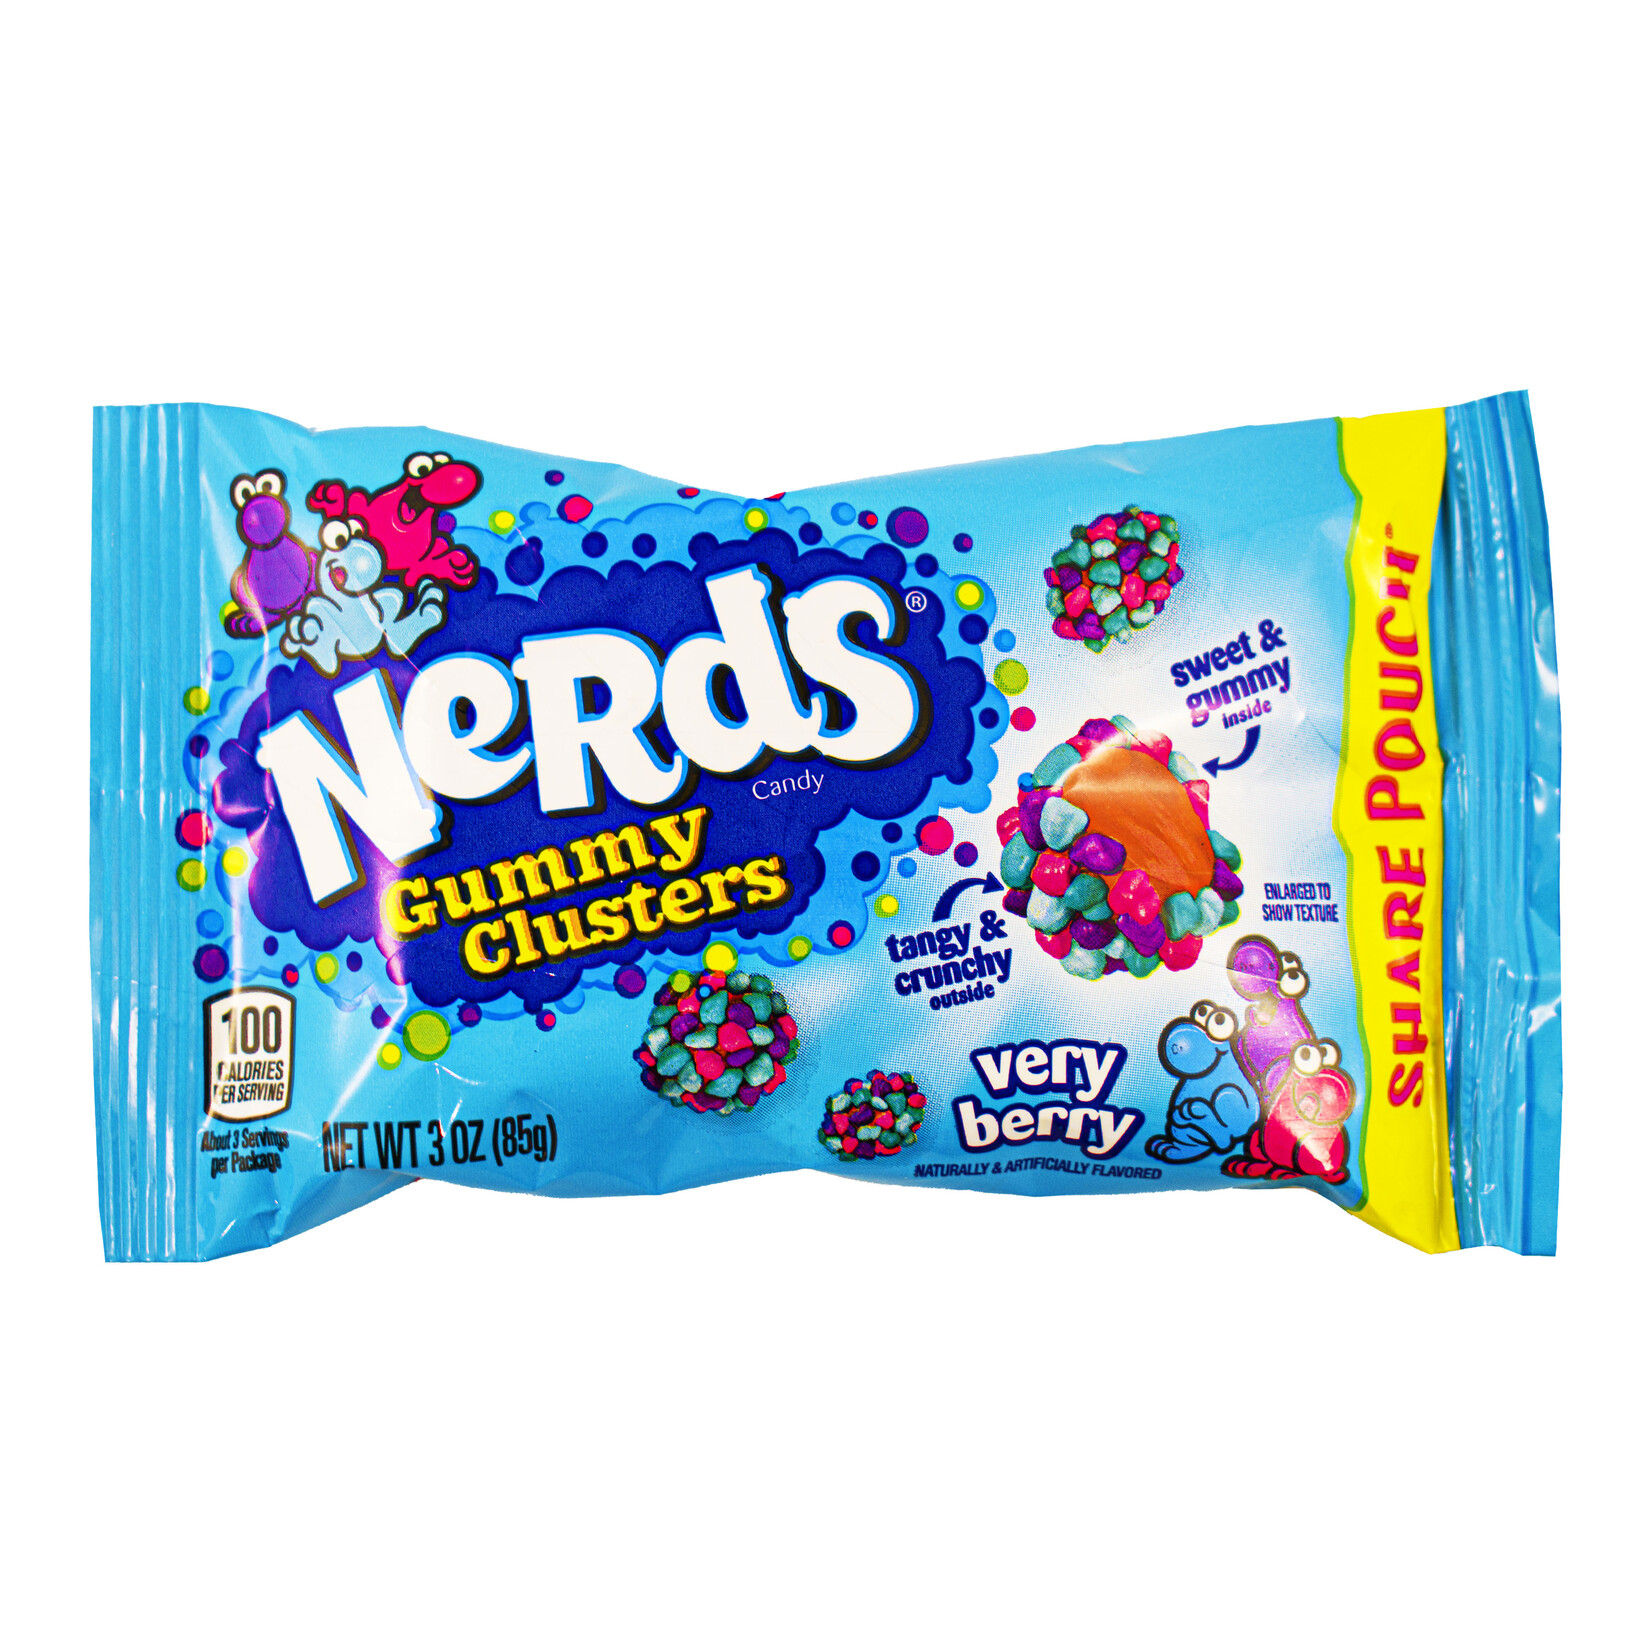 Nerds Gummy Clusters very berry Share pouch 85g - Bonbonnerie Nick